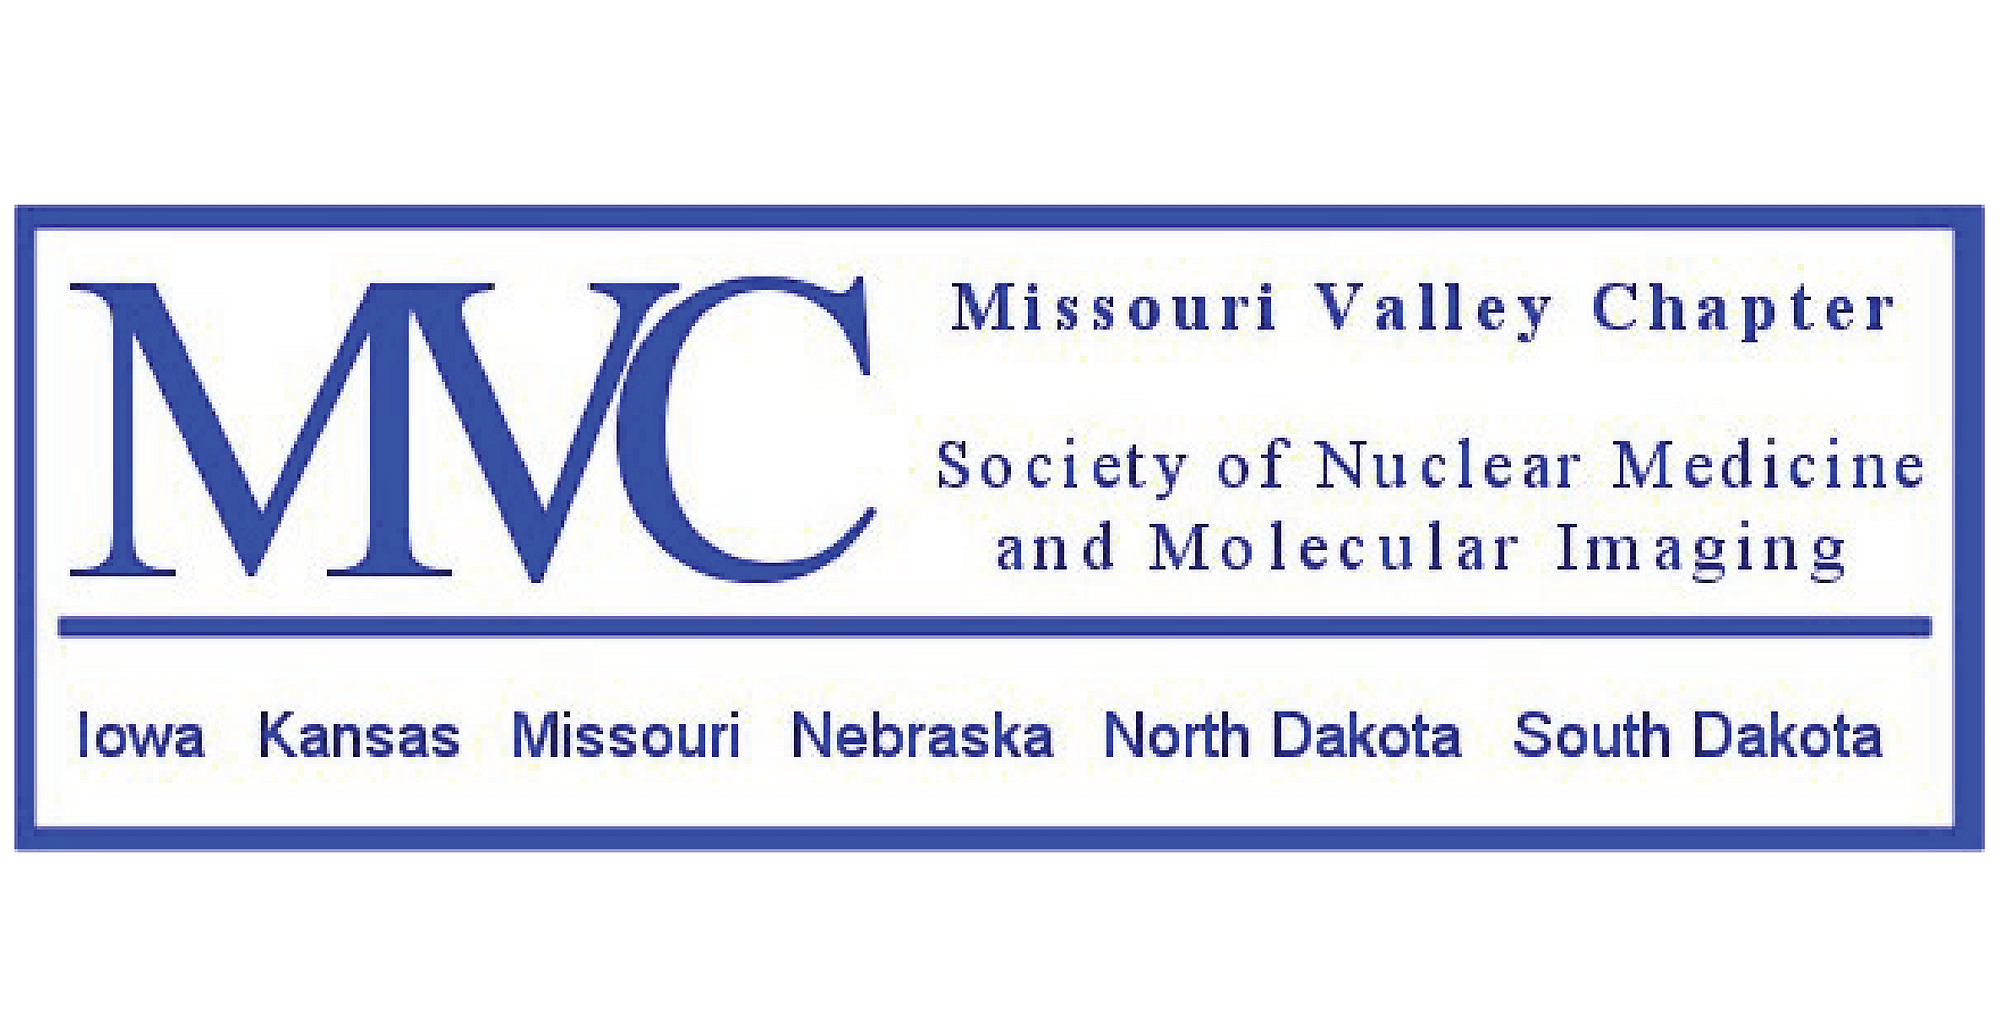 Missouri Valley Chapter of the Society of Nuclear Medicine and Molecular Imaging (MVCSNMMI) 42nd Annual Meeting